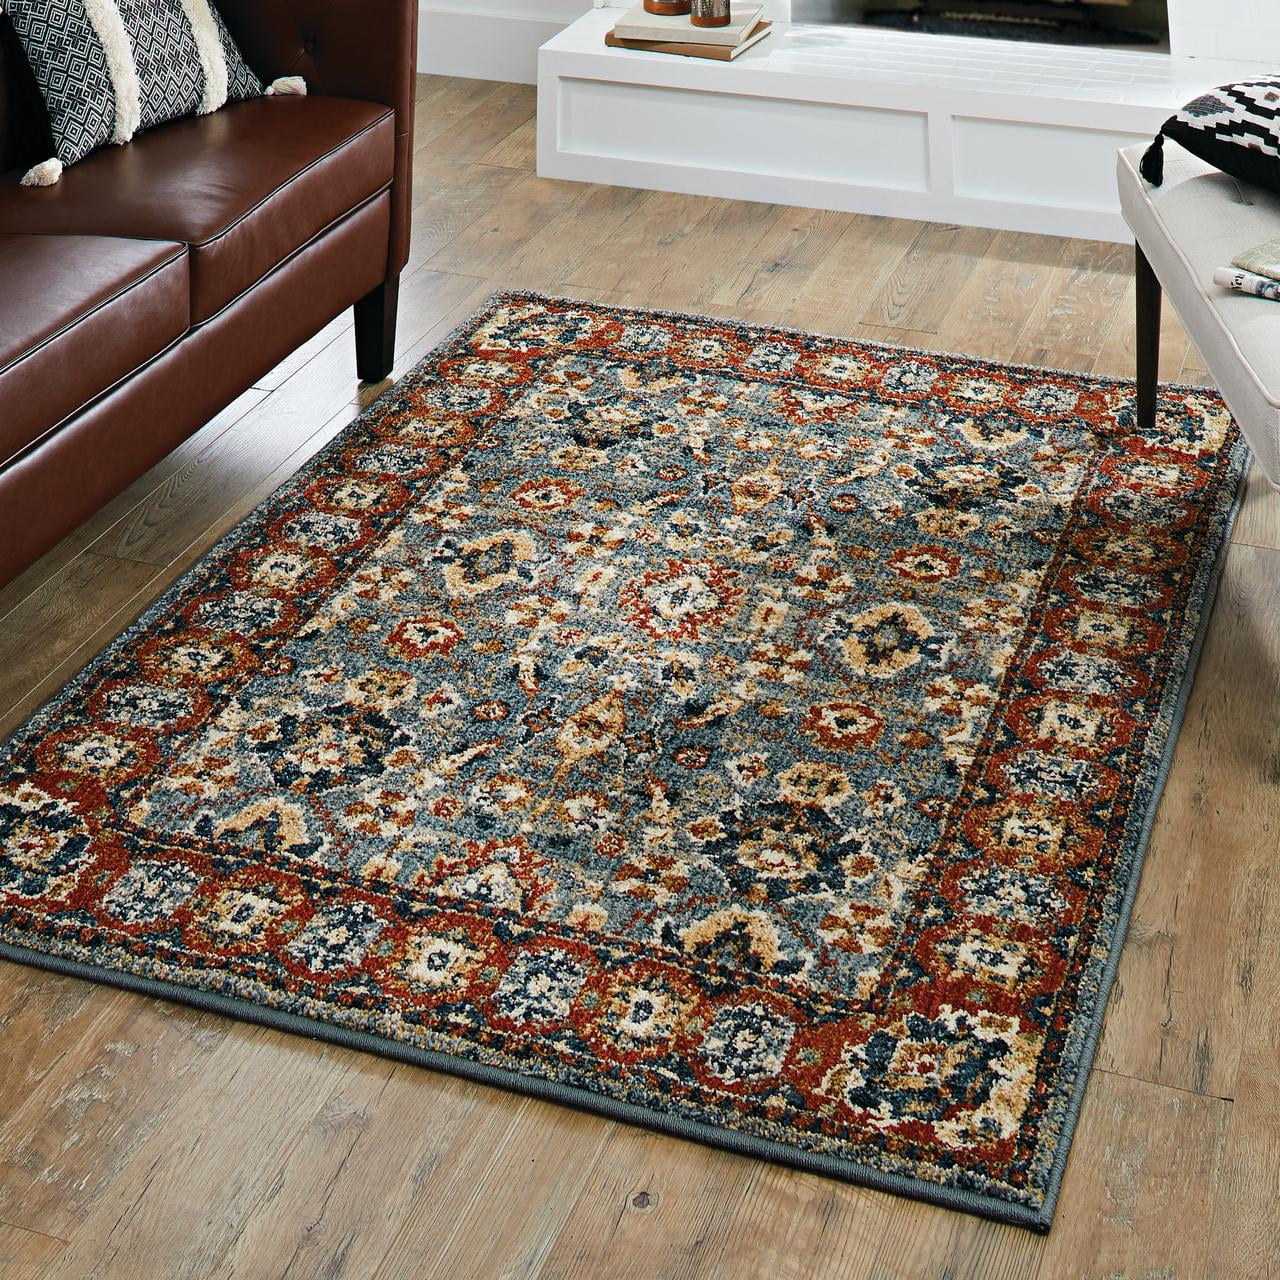 Navy Floral Oriental Style Area Carpet Rugs Rug Runners 2 3 5 7 8 10 11 13 Blue 